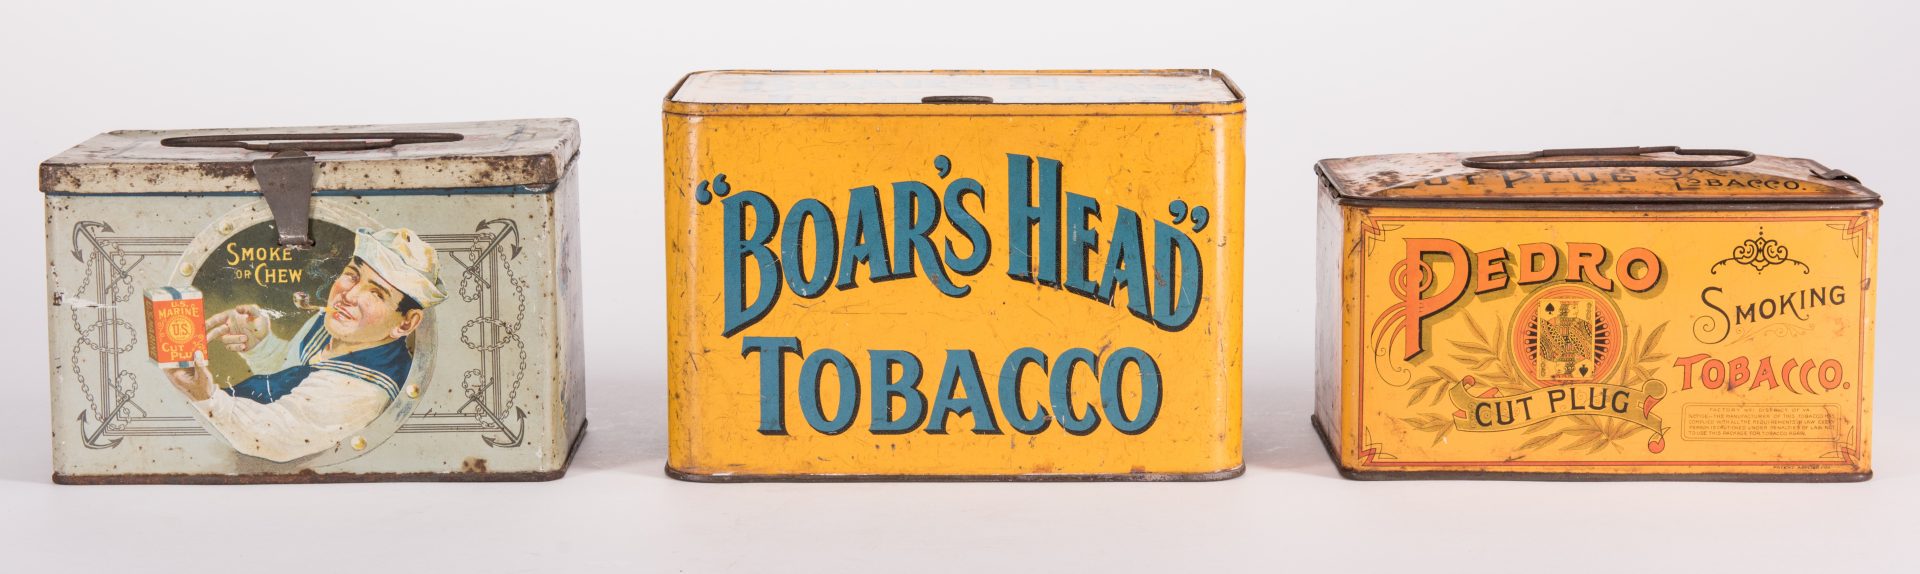 Lot 801: 9 Advertising Tobacco Ephemera, inc. Tins and Wrappers